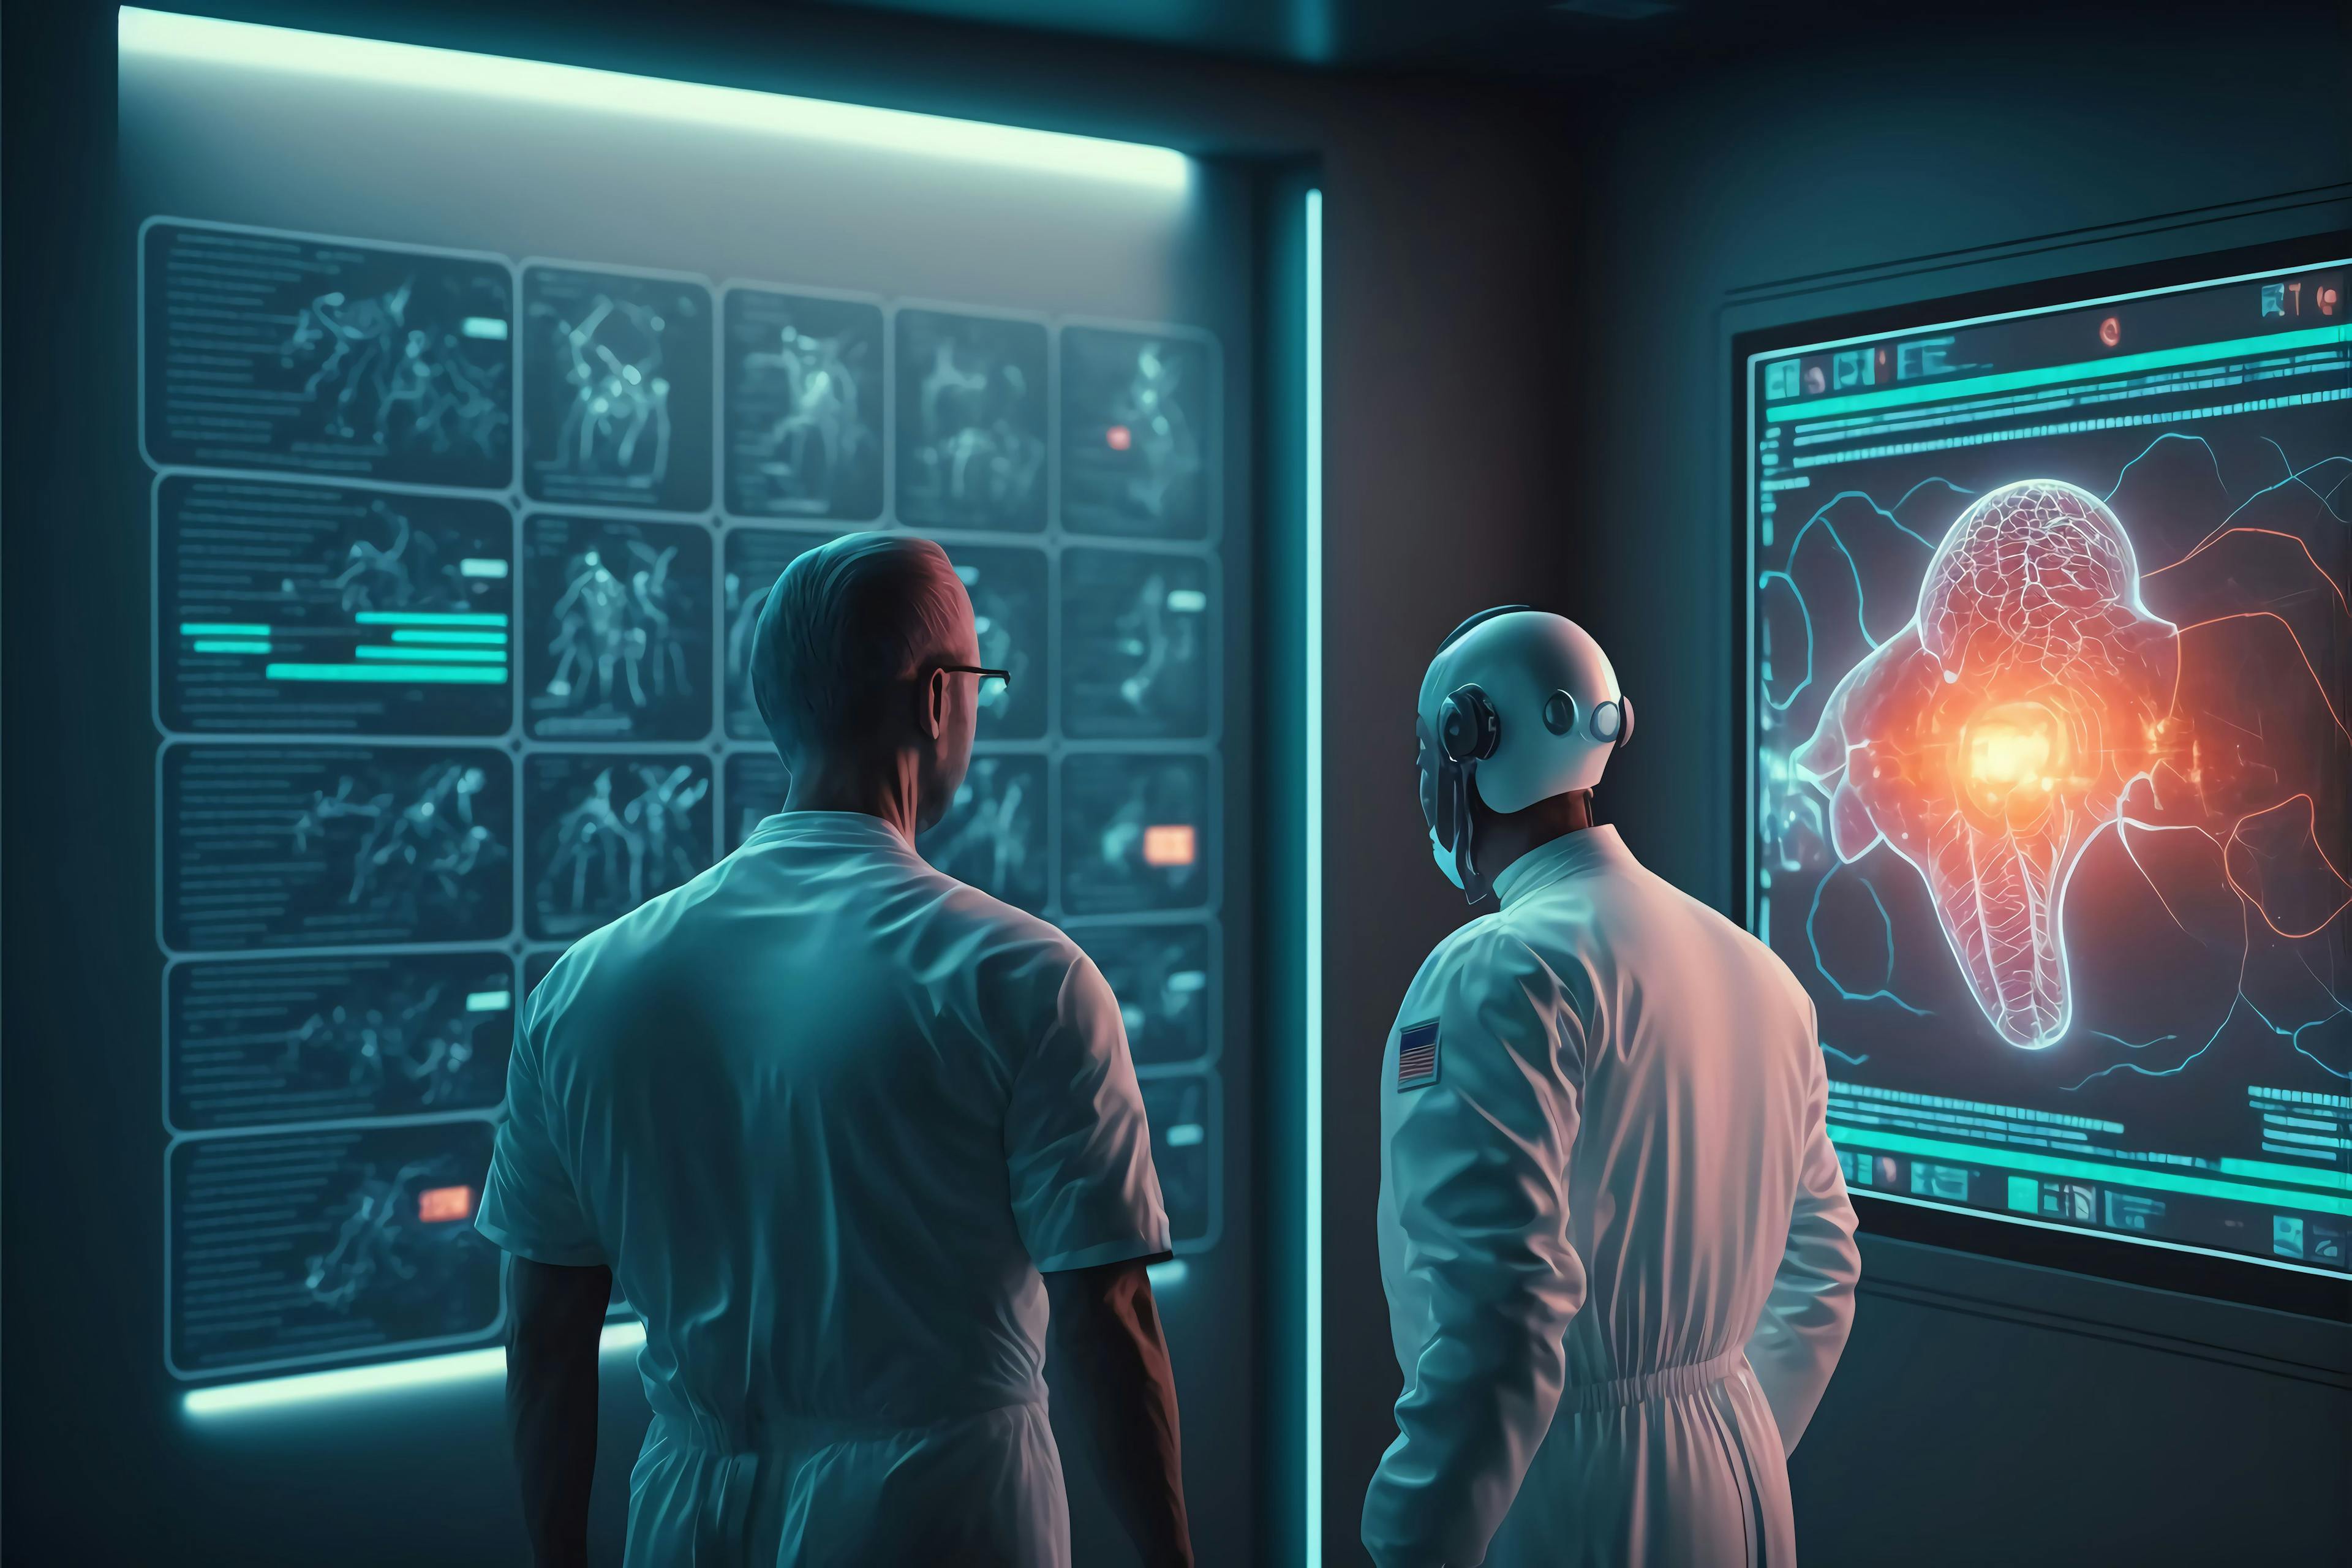 Artificial Intelligence in Hospitals, Doctor being assisted by AI bot for clinical diagnosis | Image Credit: © Hamid - stock.adobe.com.